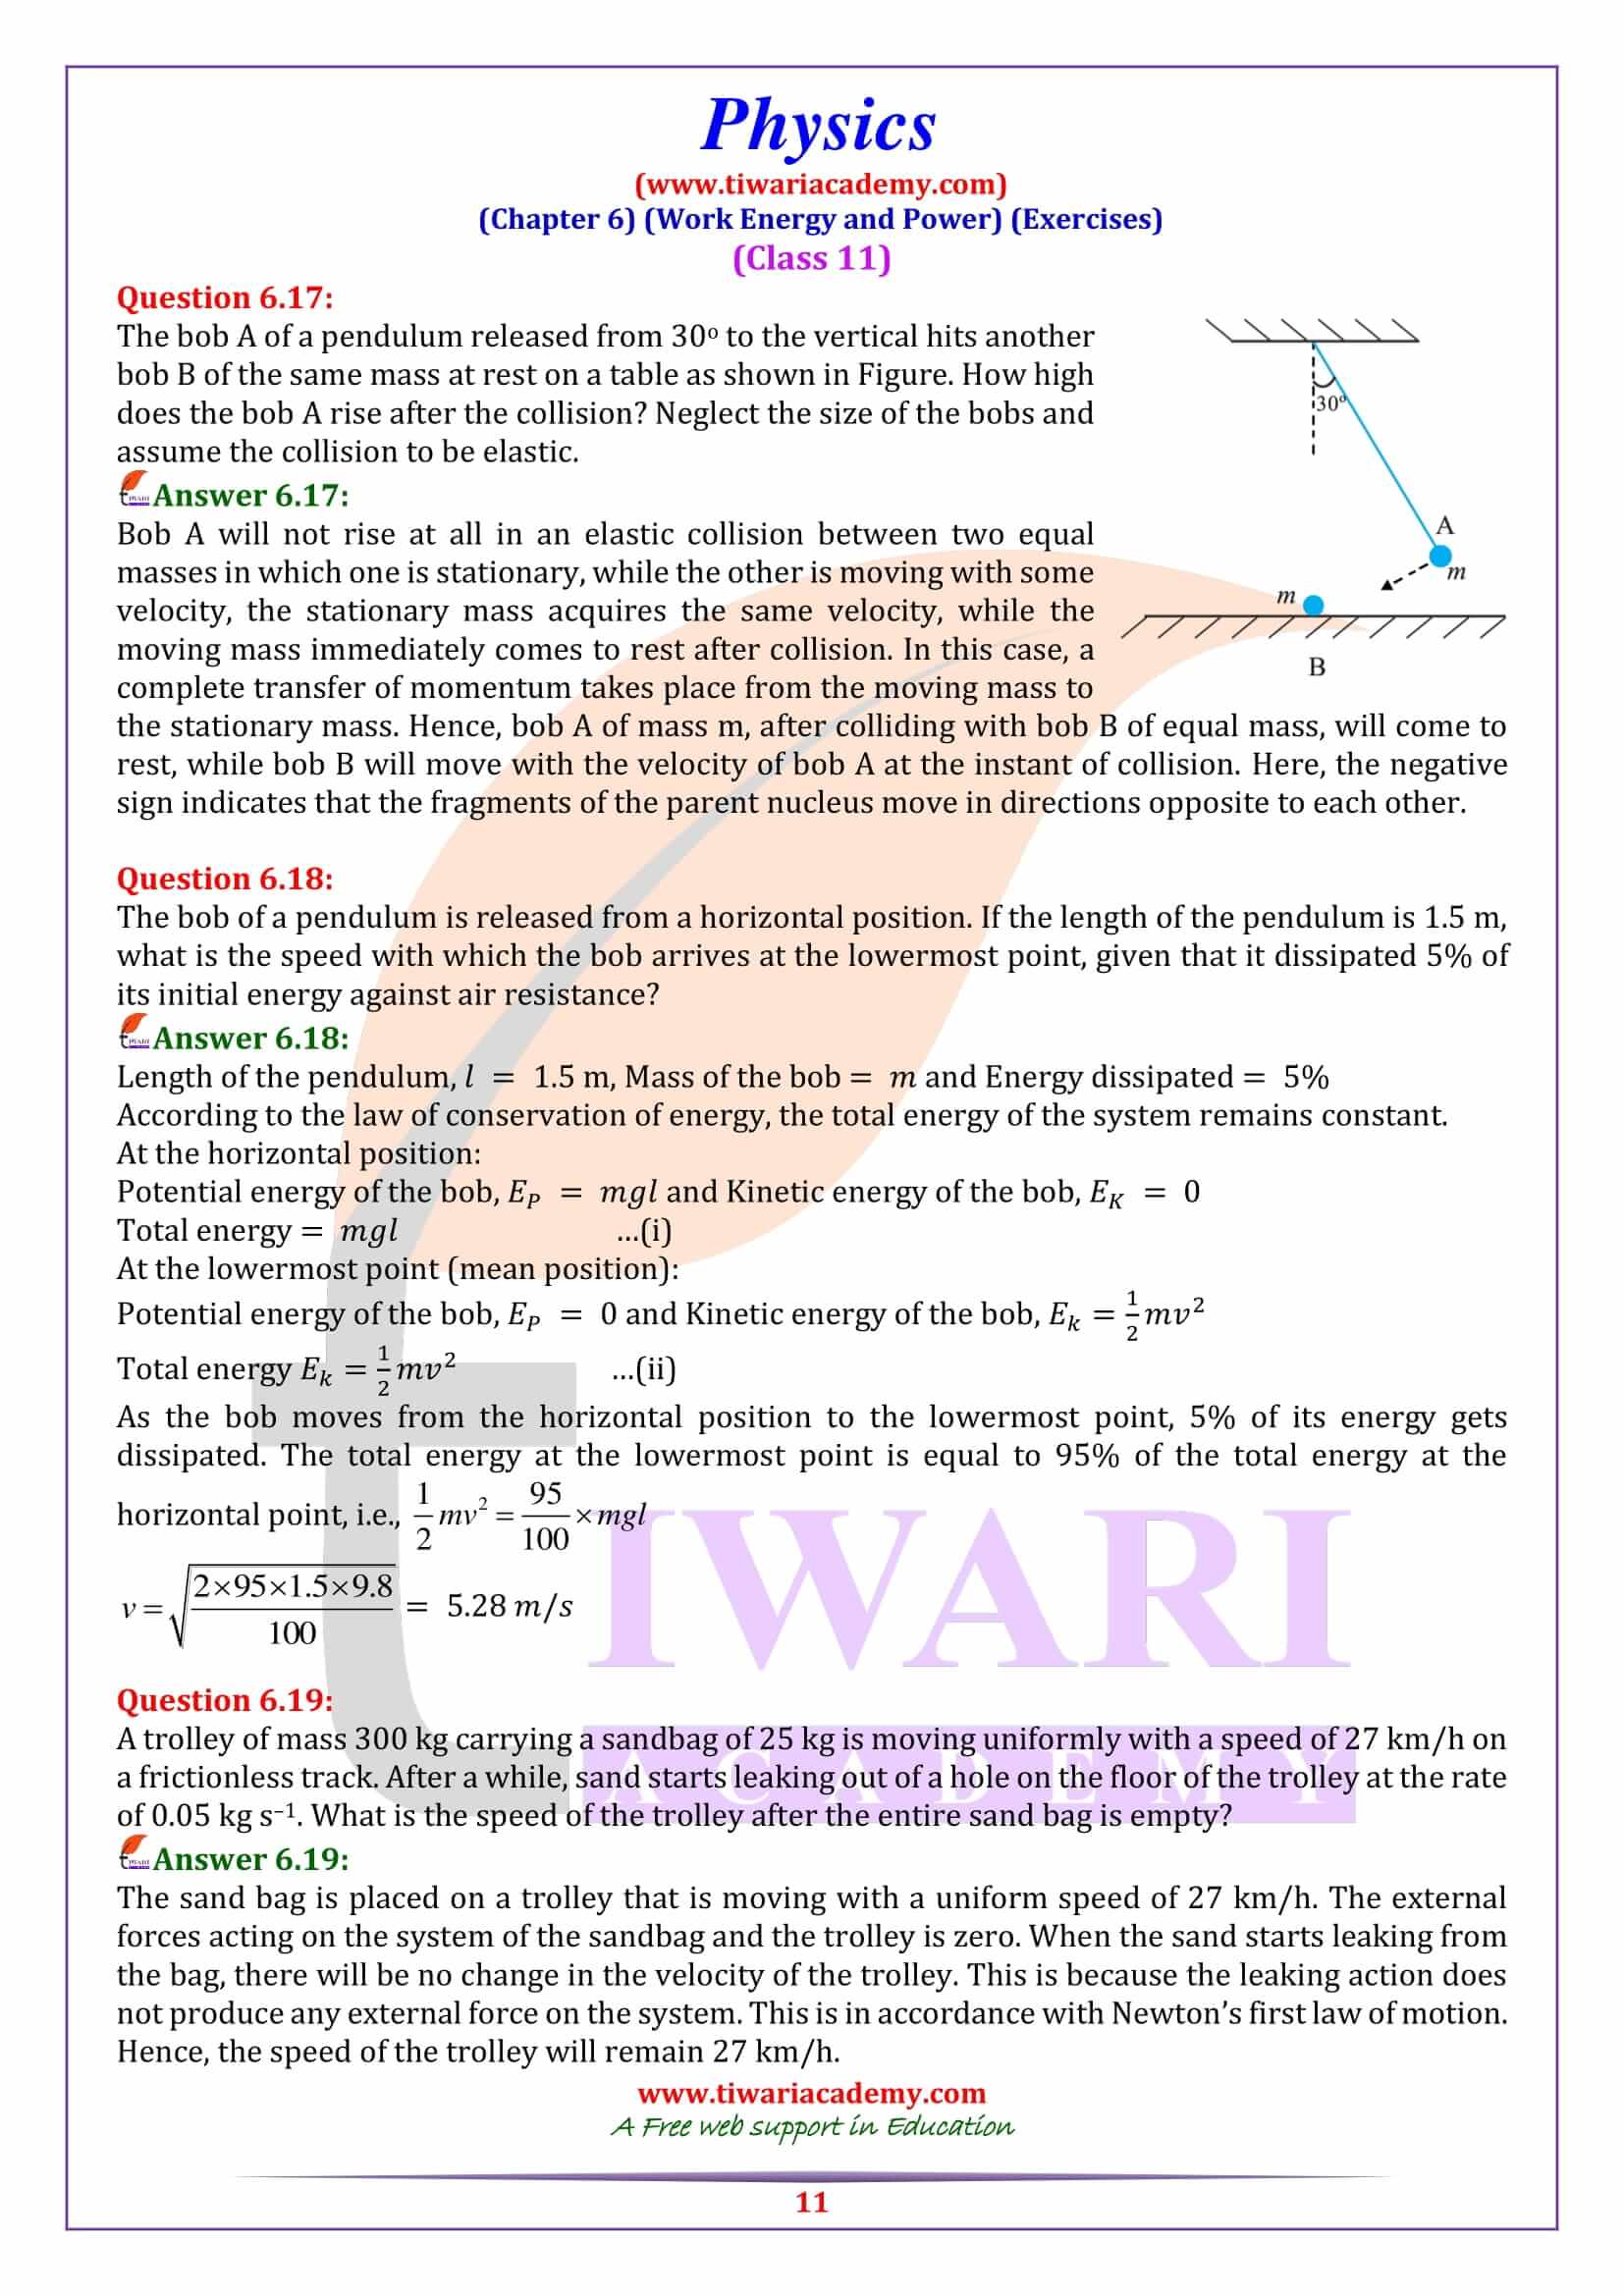 Class 11 Physics Chapter 6 for CBSE board